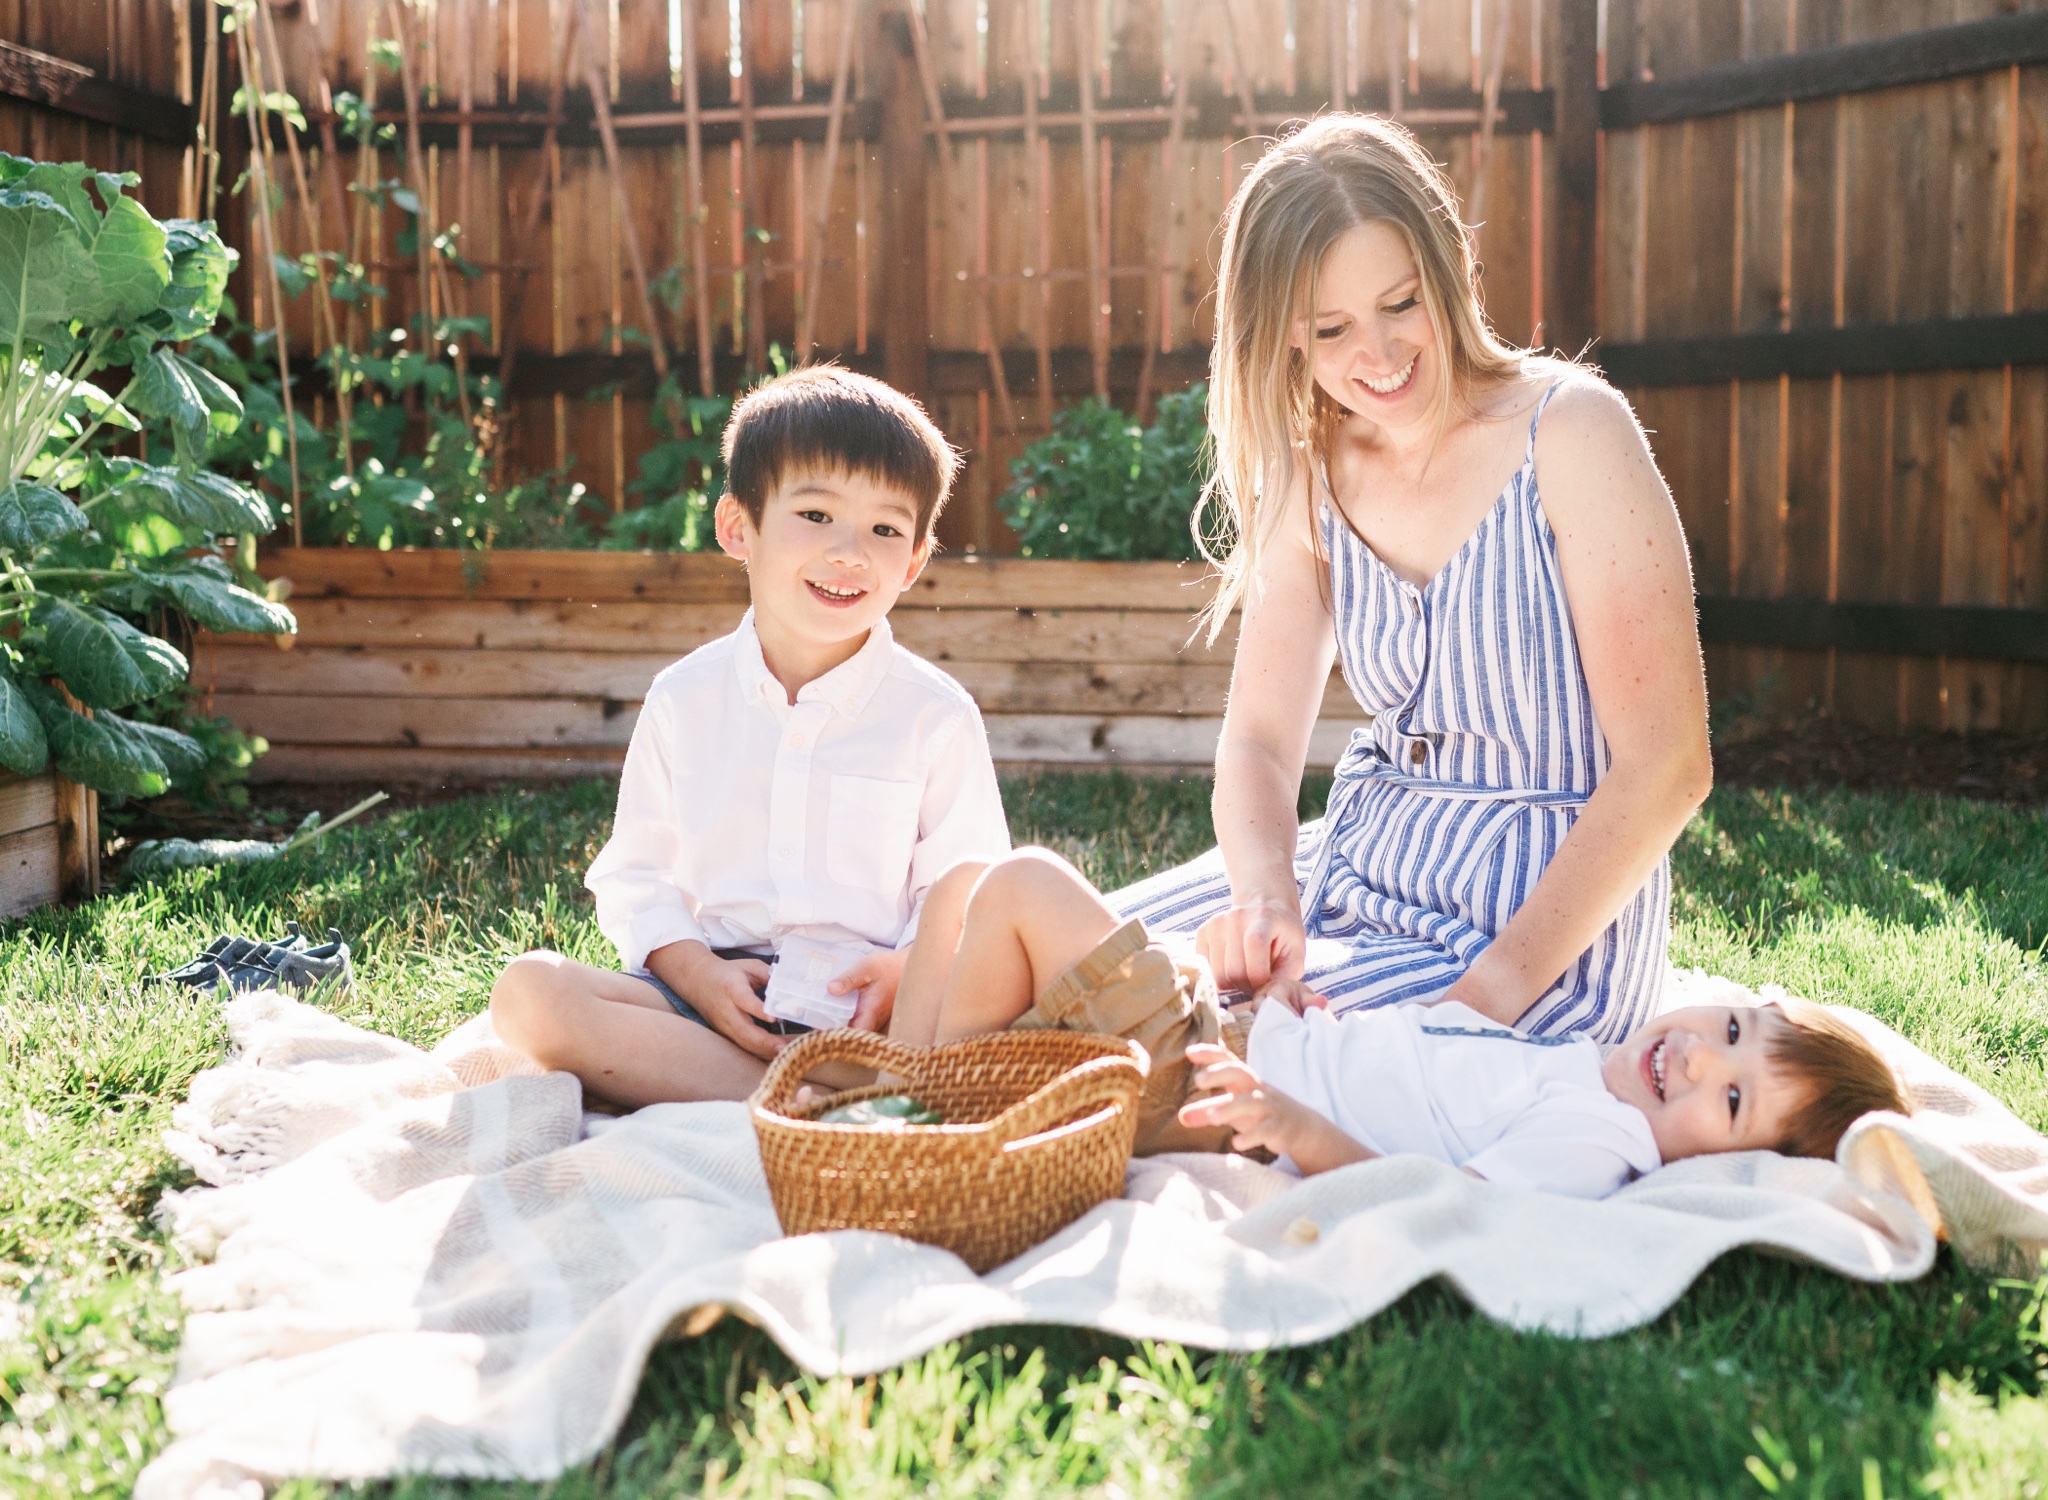 A young mother and her sons having fun in their vegetable garden in Denver Colorado during a motherhood photoshoot